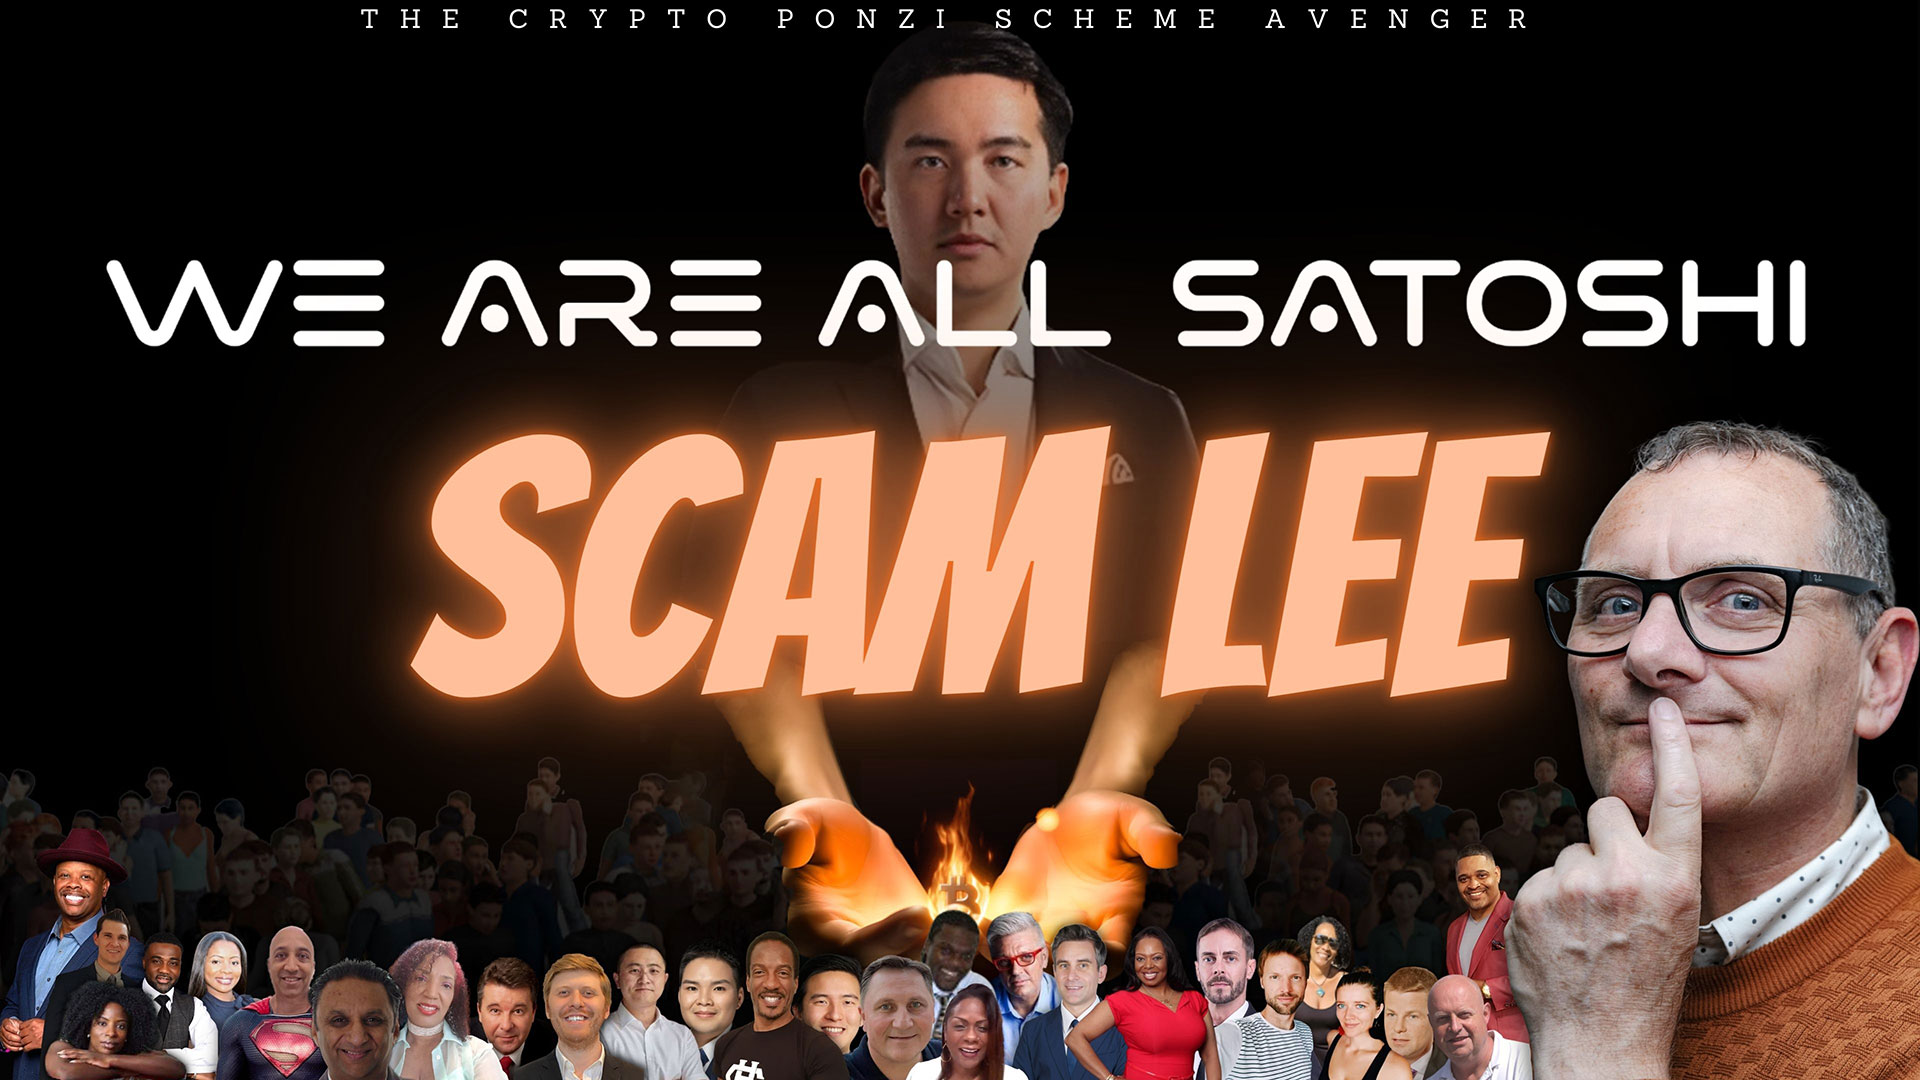 "The Avengers Expose "We Are All Satoshi": Unraveling the Crypto Ponzi Scheme by Sam Lee (Scam Lee)"